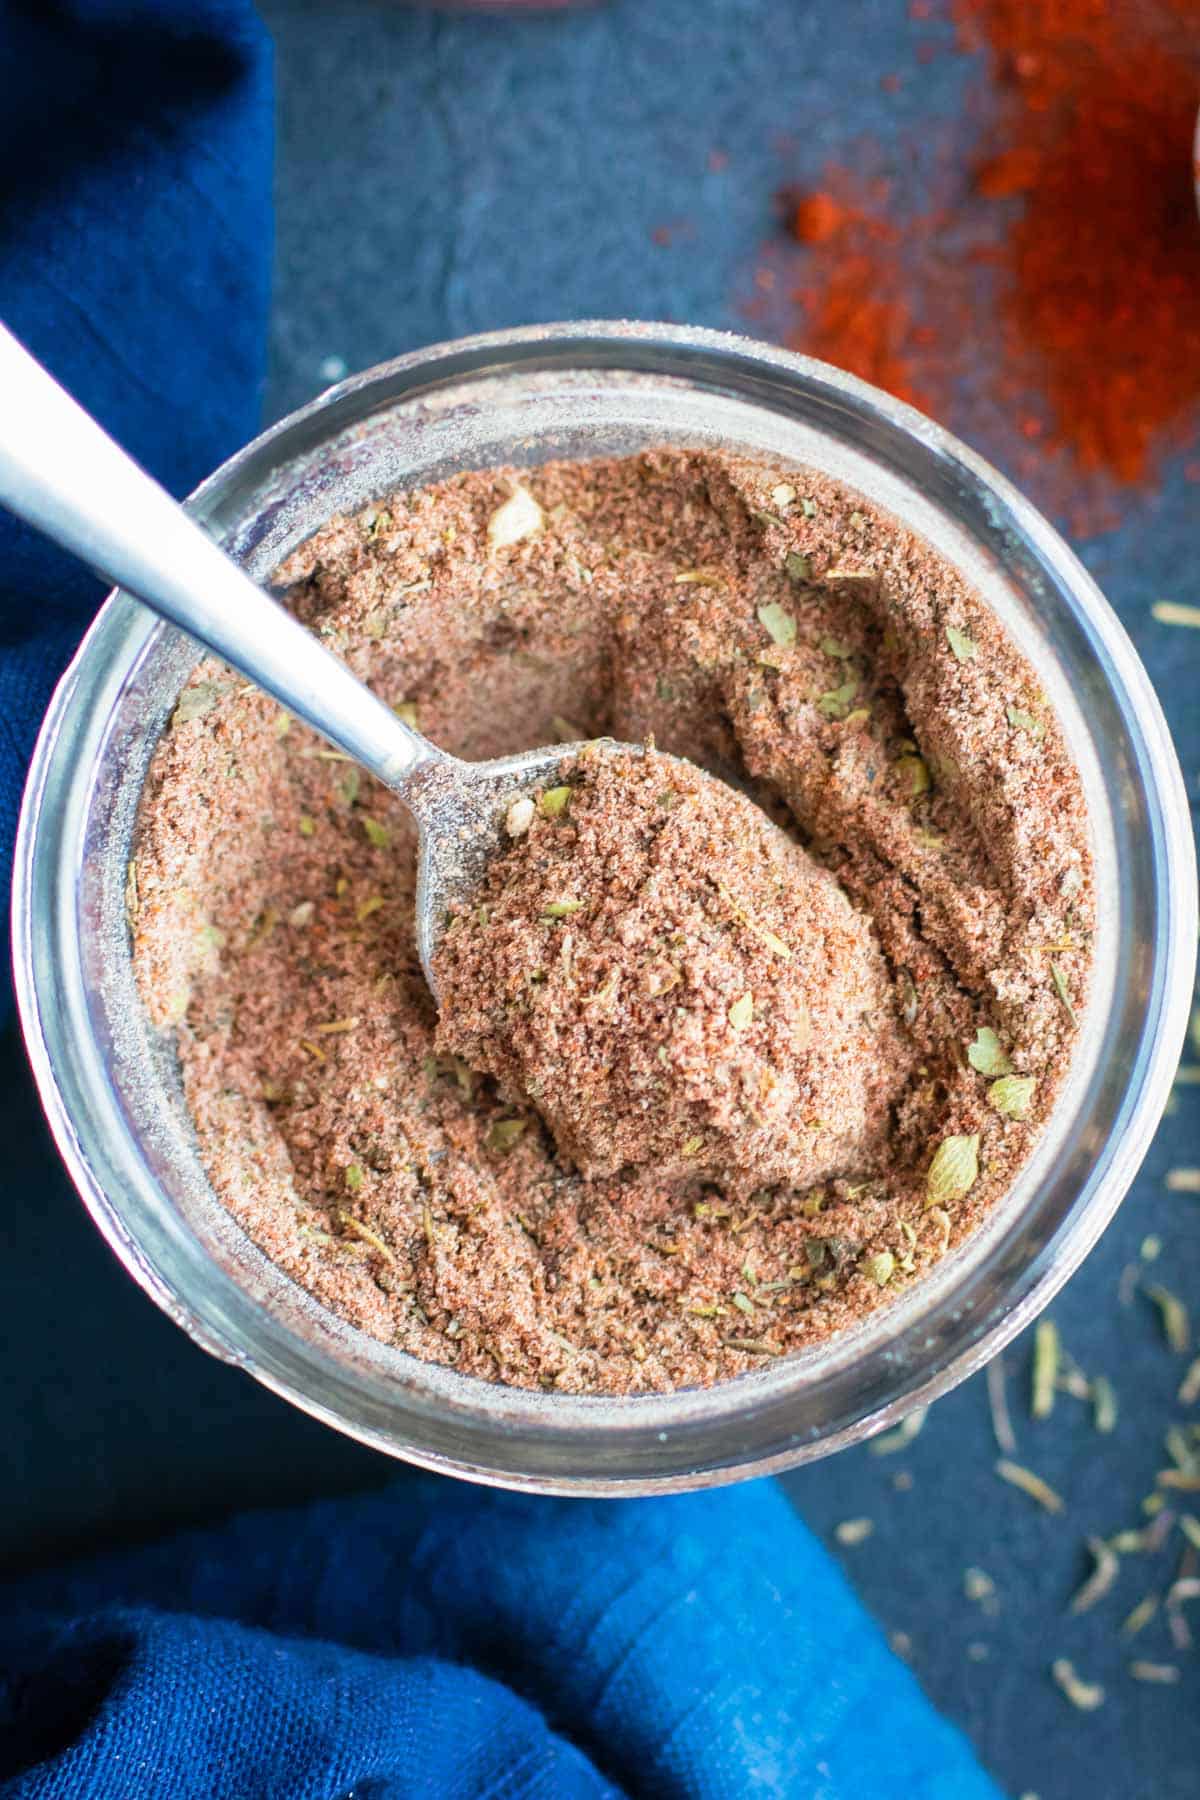 A silver spoon scooping out some homemade blackened seasoning mix from a glass jar.